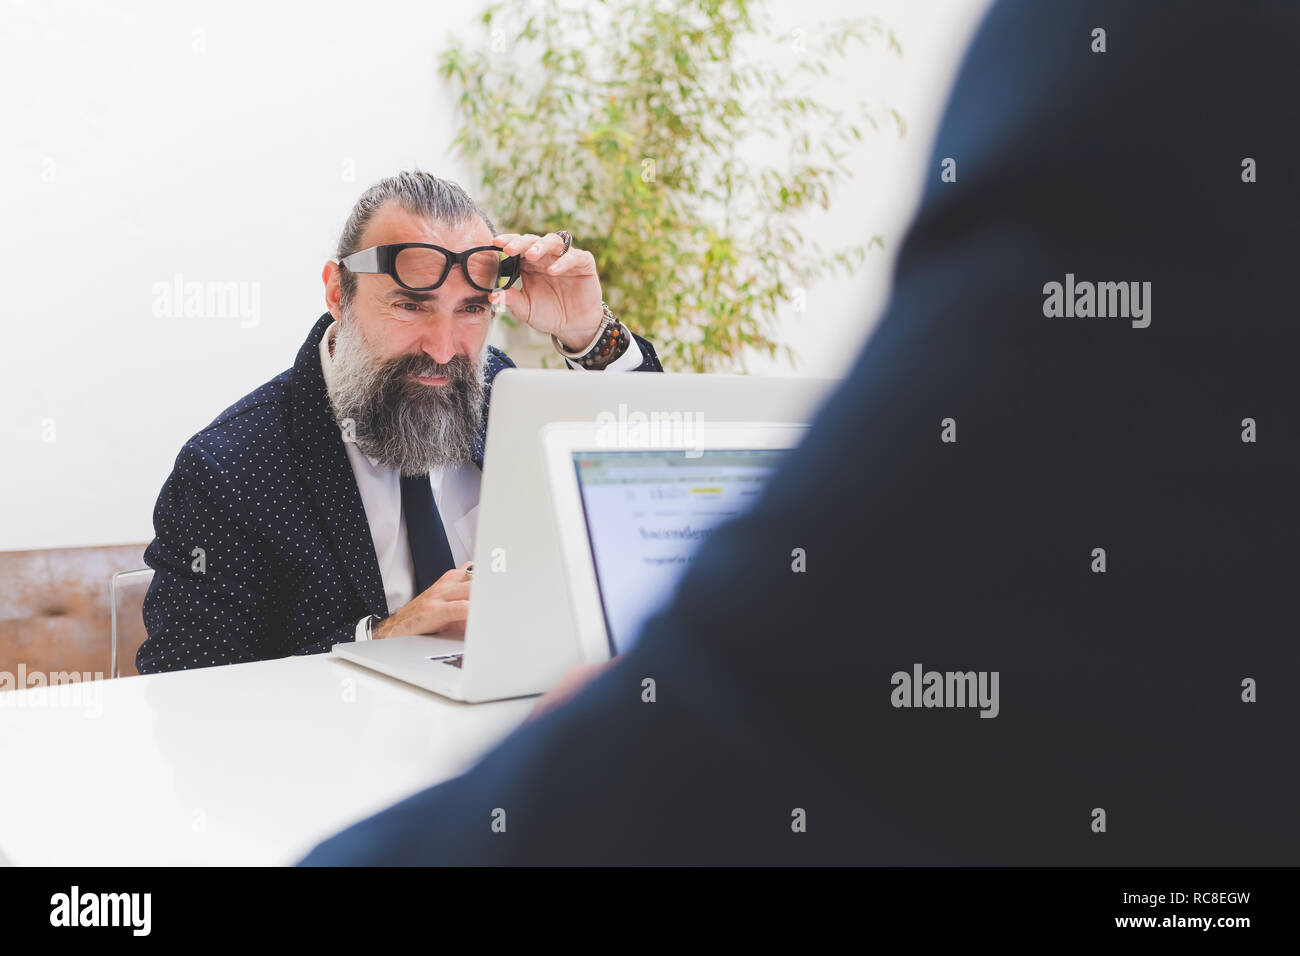 Businessman looking at laptop at office desk, over shoulder view Stock Photo